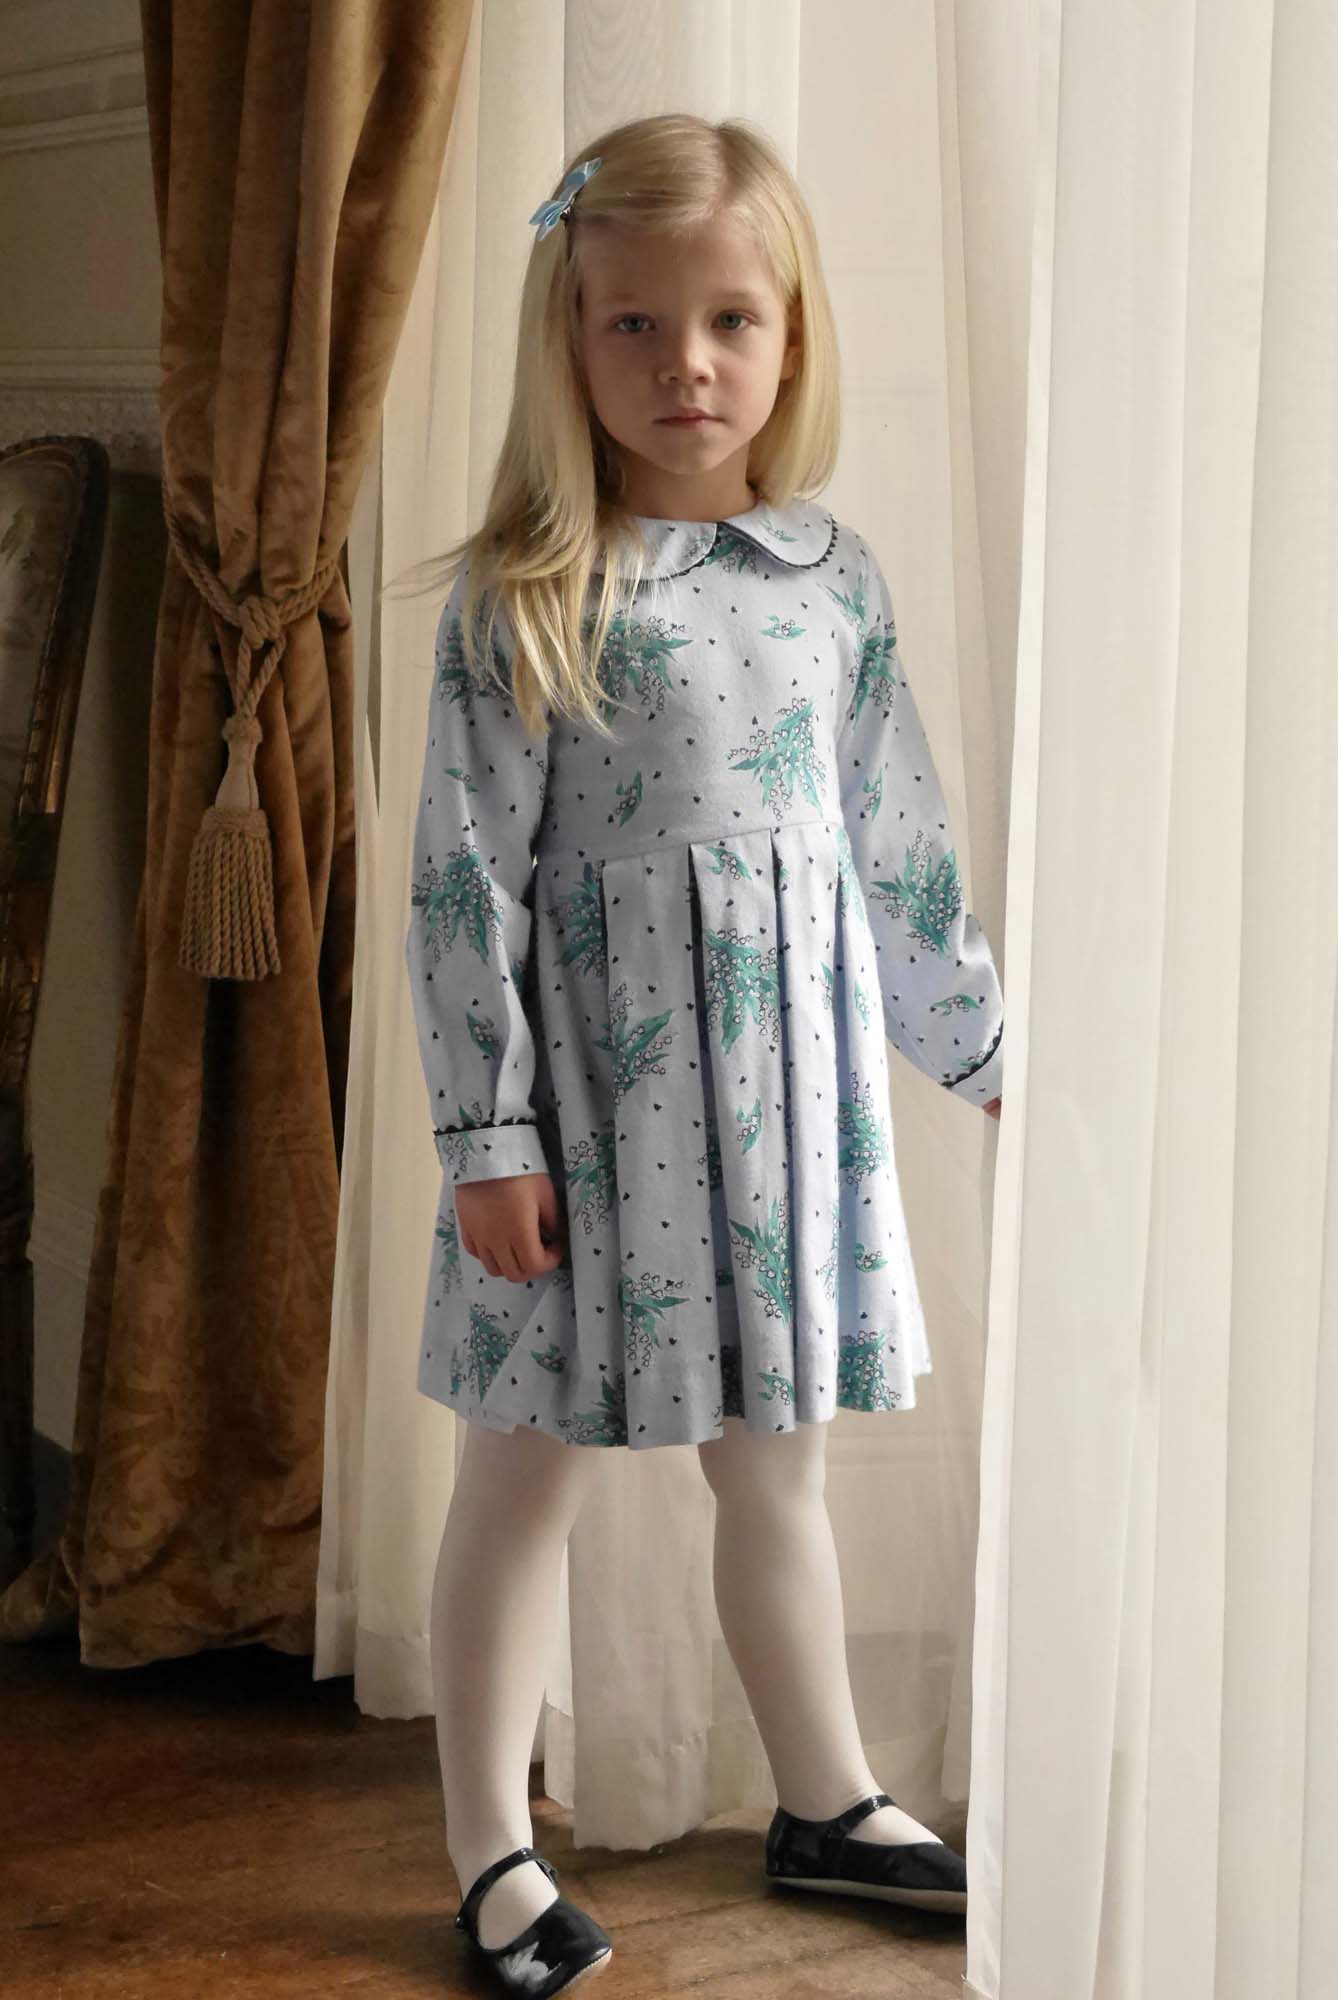 Les Petis Anges Children's Clothing Company in South West London Club Card 1.jpg